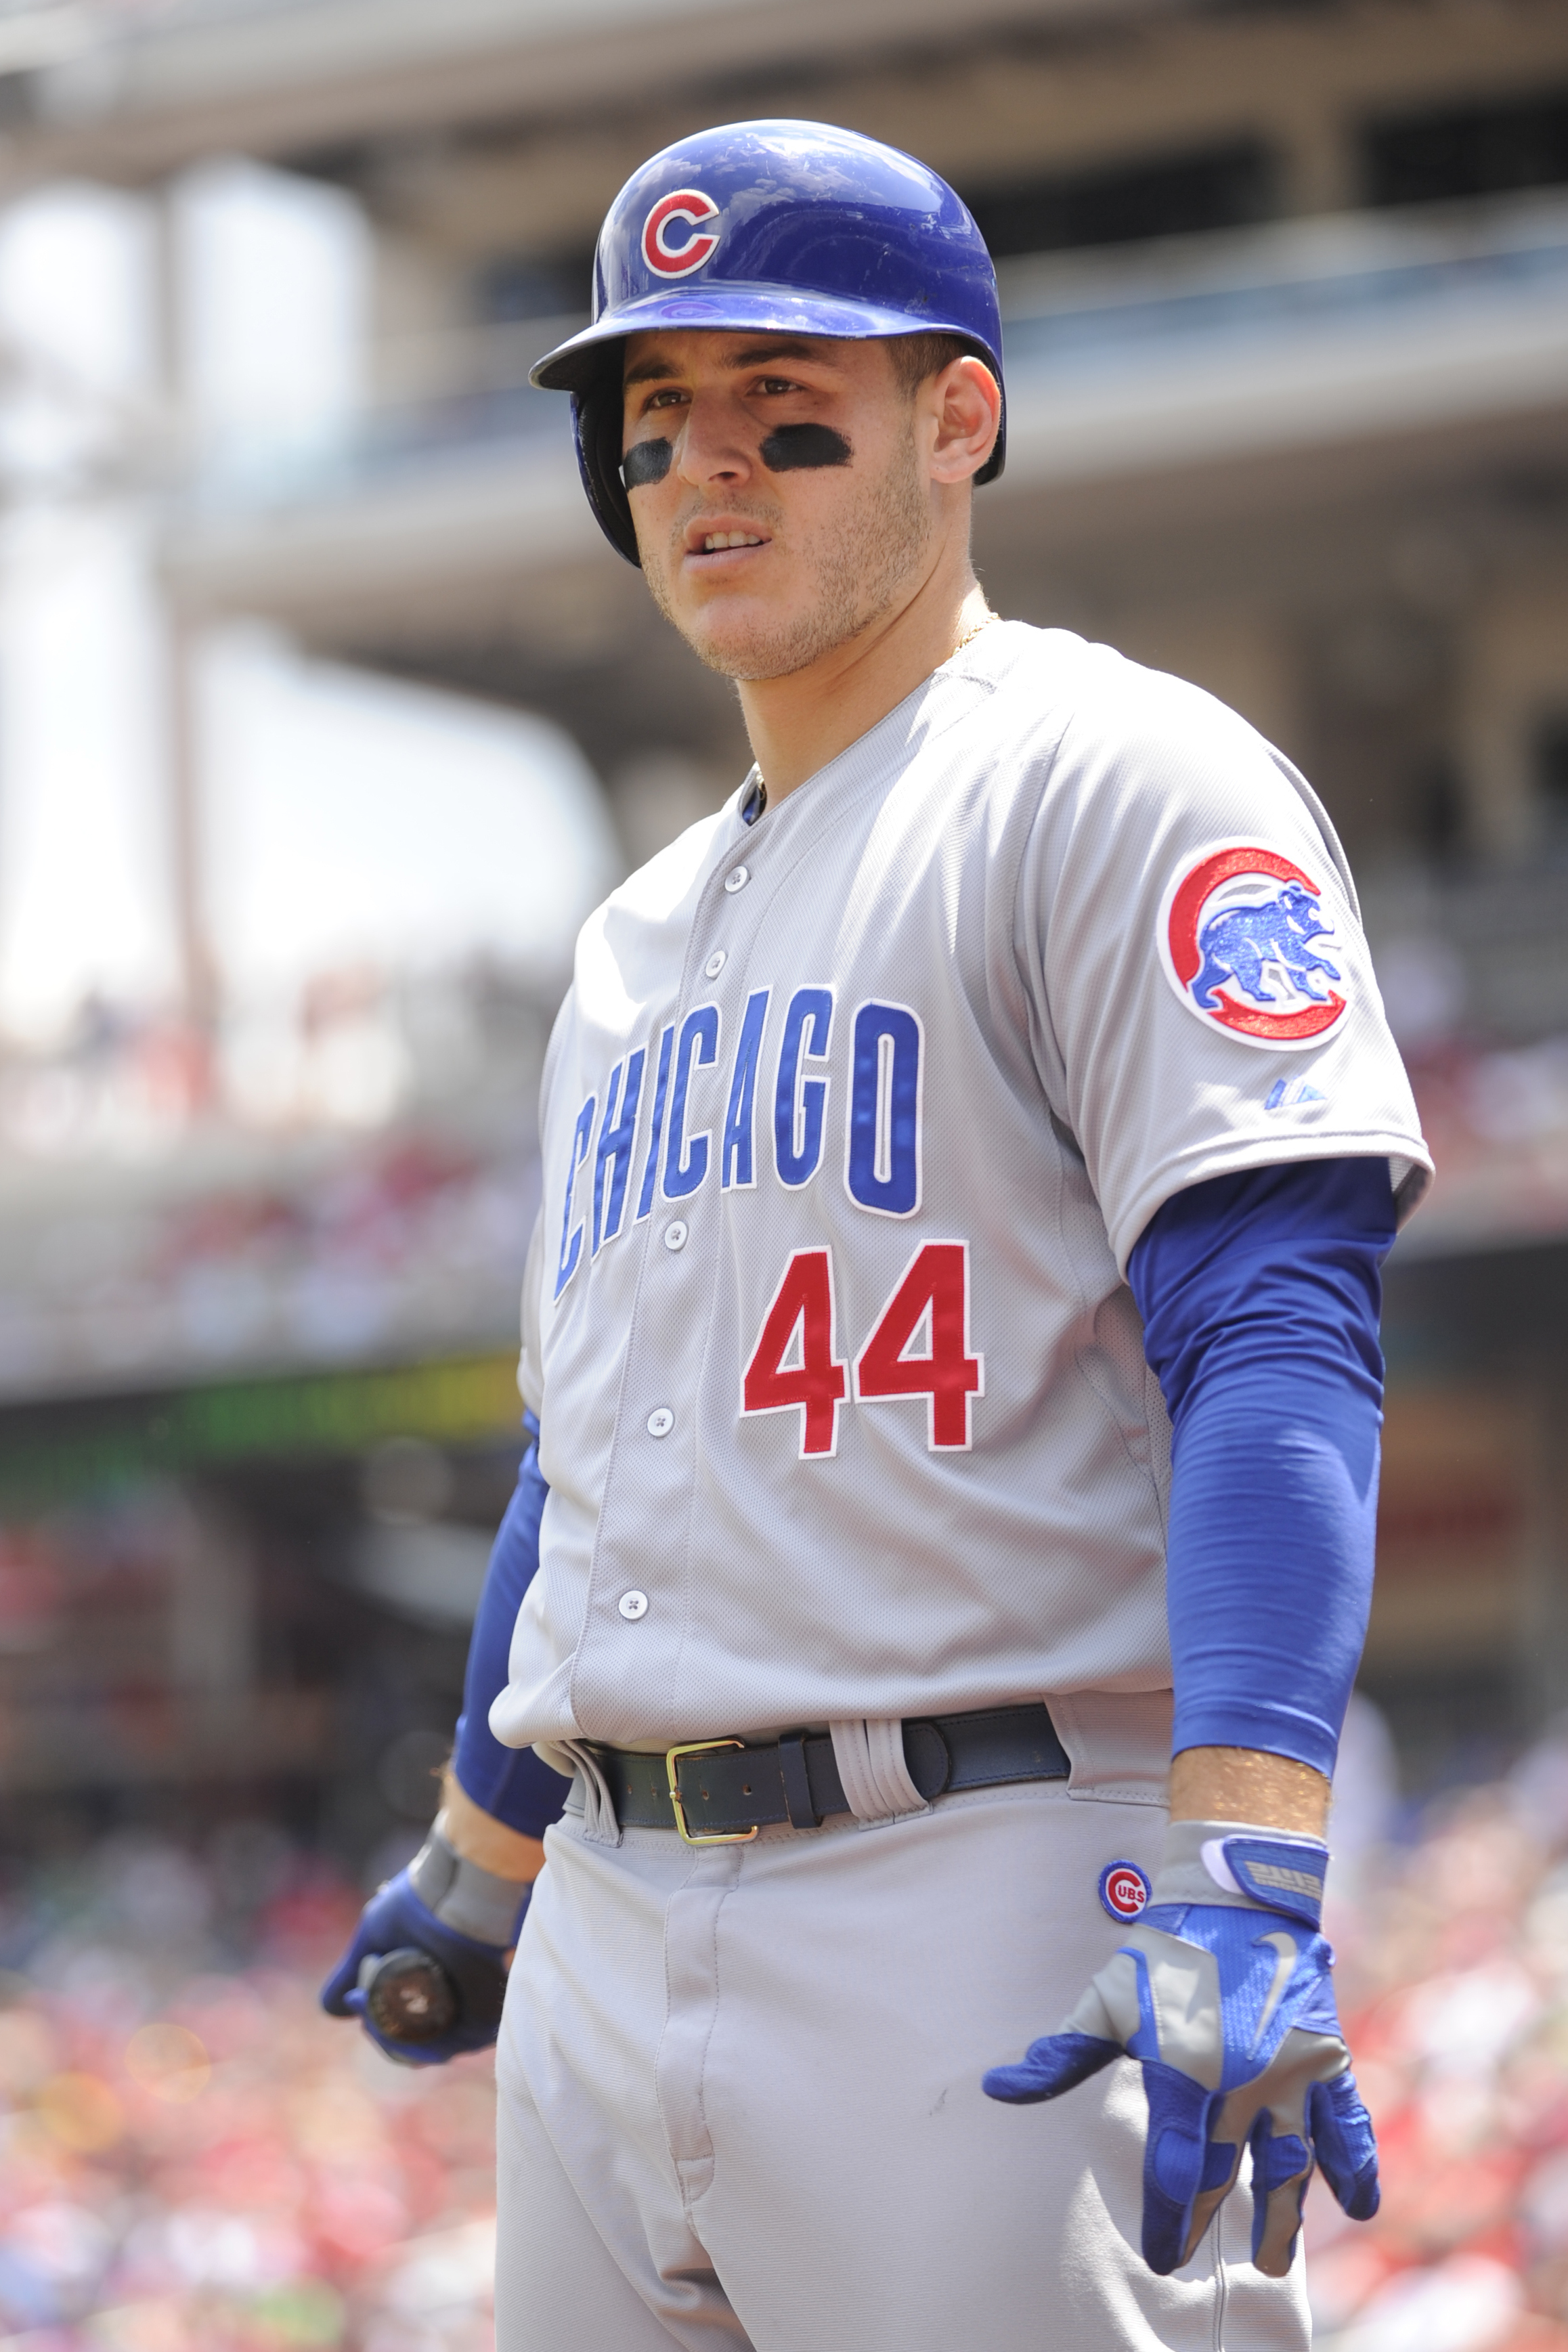 Cubs going all-in on throwback jerseys in 2014. Ten different